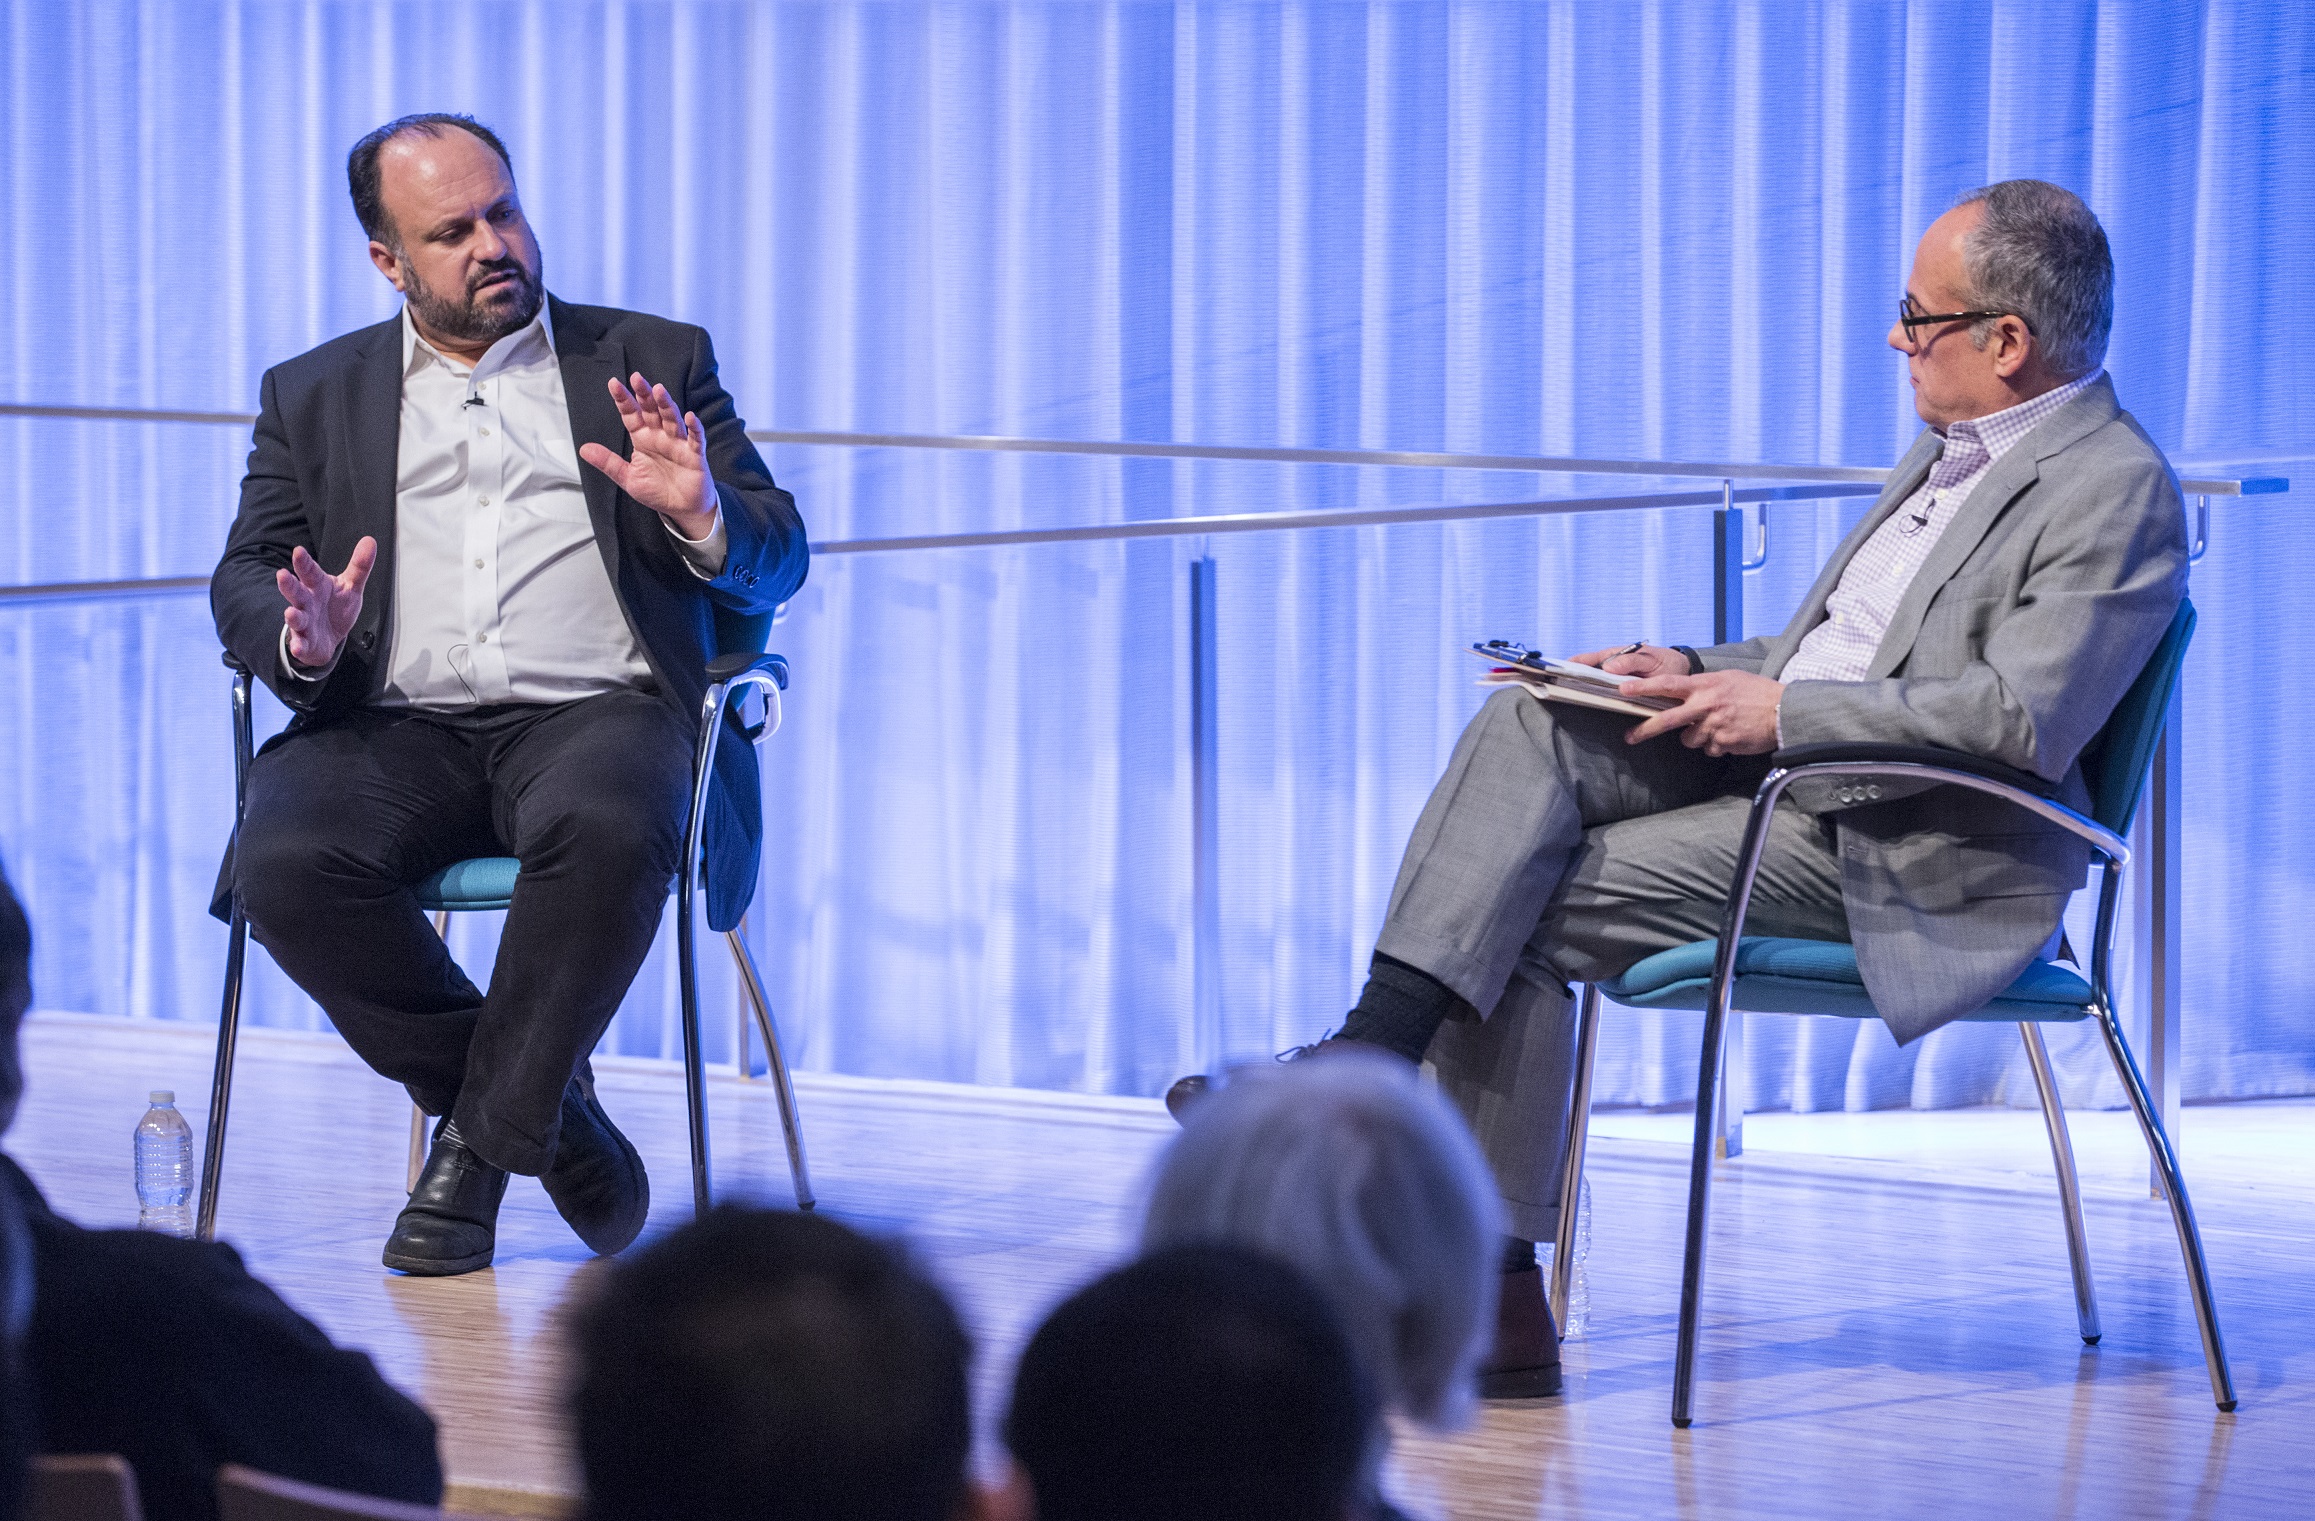 Bernard Haykel and Clifford Chanin speak onstage during a public program at the Museum’s Auditorium.